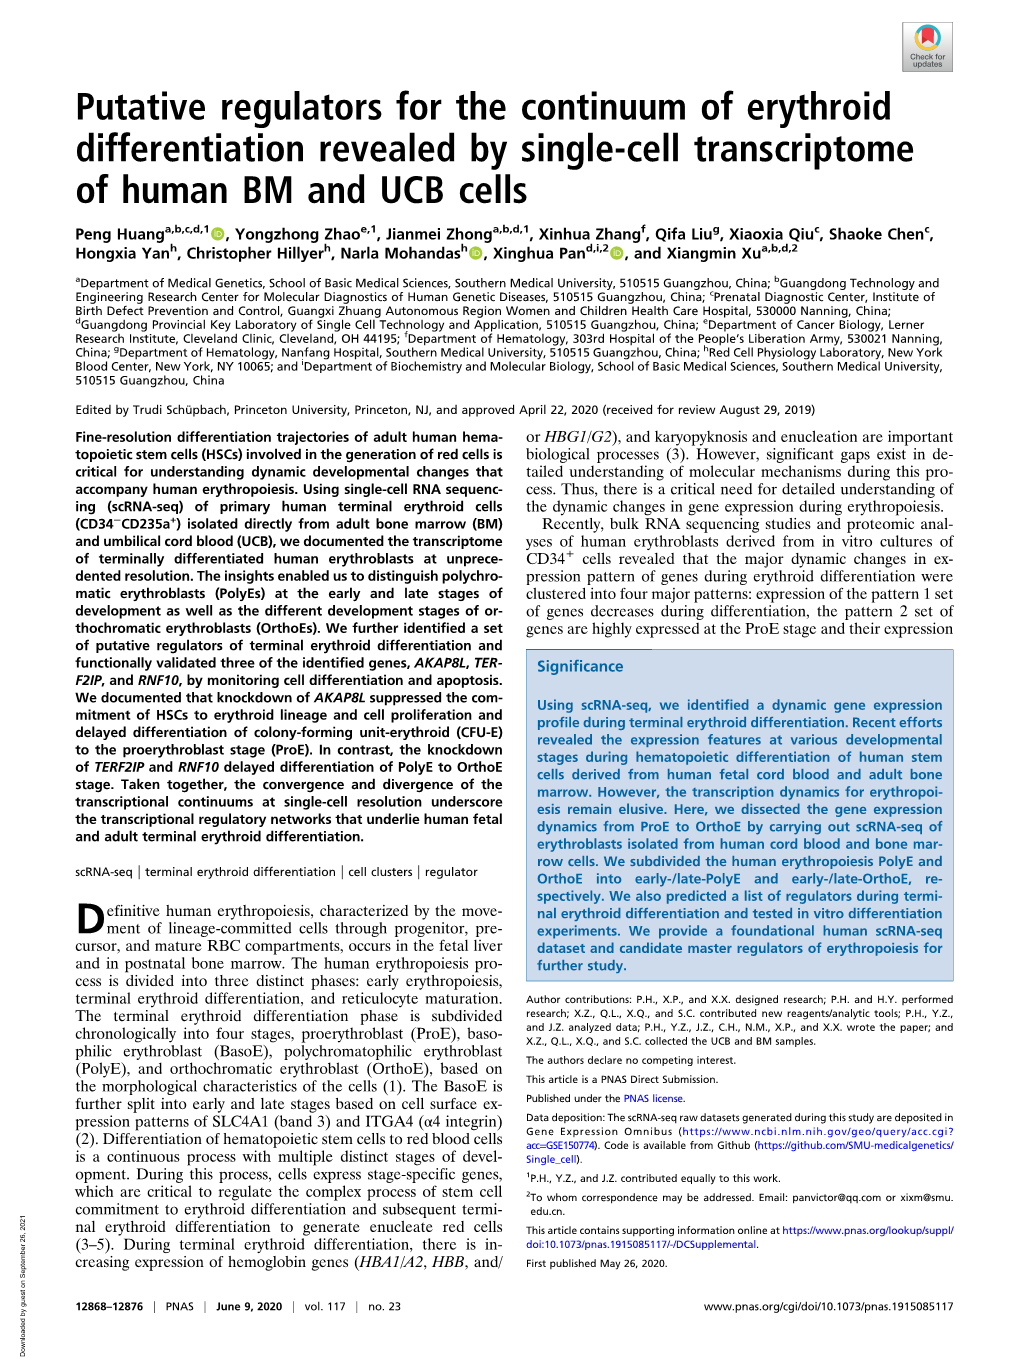 Putative Regulators for the Continuum of Erythroid Differentiation Revealed by Single-Cell Transcriptome of Human BM and UCB Cells